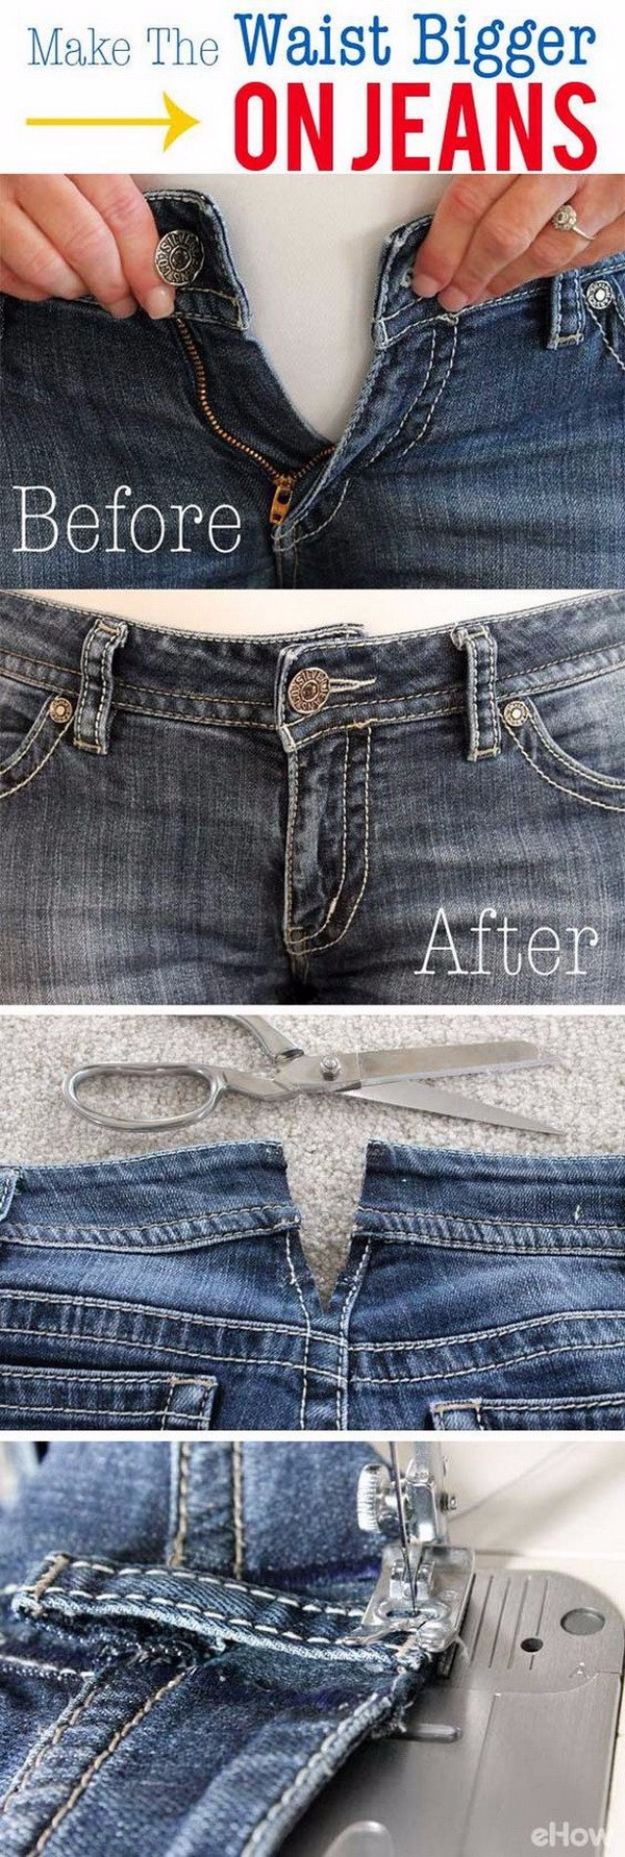 Clothes Hacks - Make The Waist Bigger On Jeans - DIY Fashion Ideas For Women and For Every Girl - Easy No Sew Hacks for Men's Shirts - Washing Machines Tips For Teens - How To Make Jeans For Fat People - Storage Tips and Videos for Room Decor http://diyjoy.com/diy-clothes-hacks